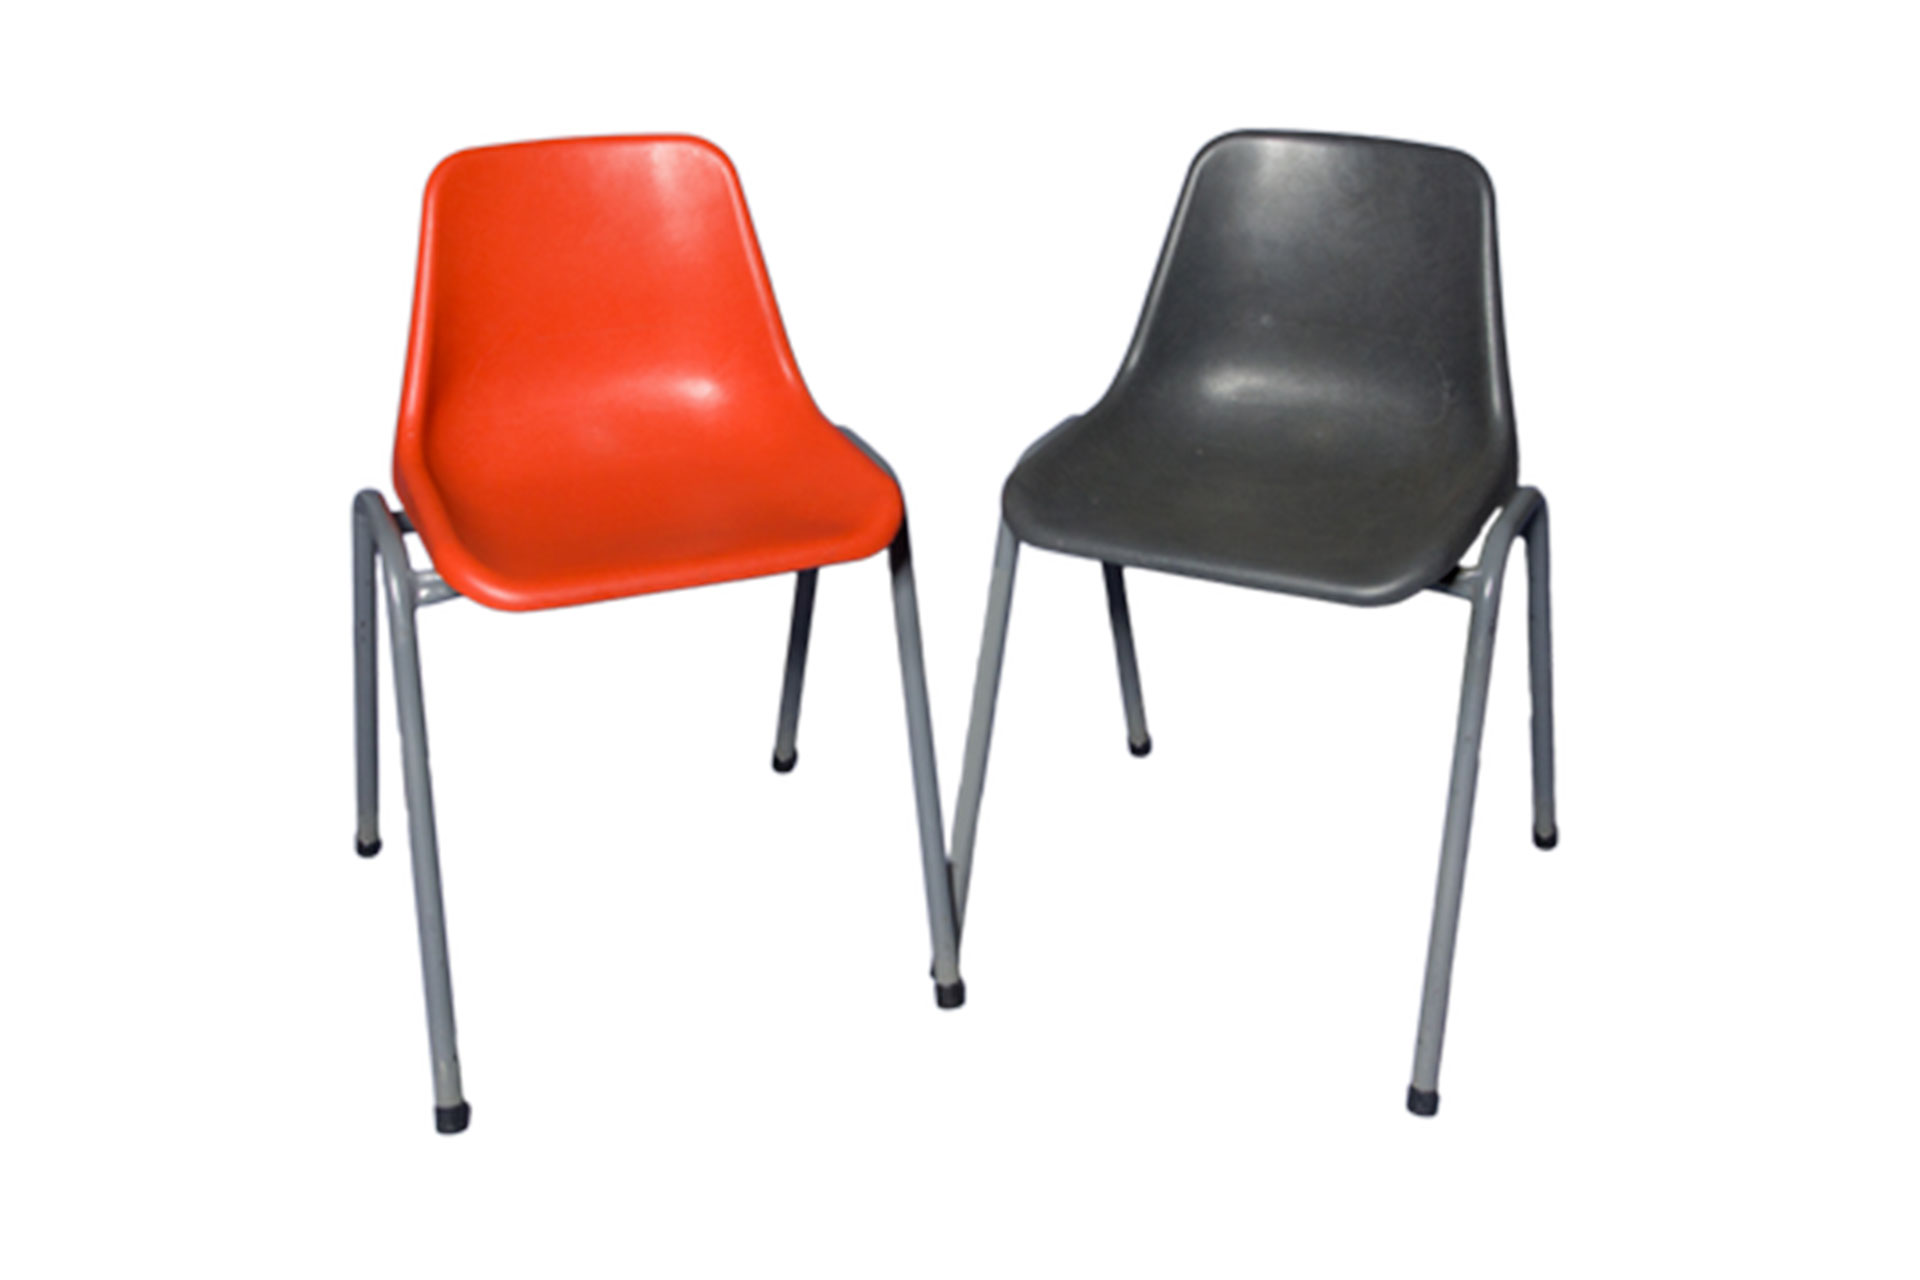 Primary-School-Chairs